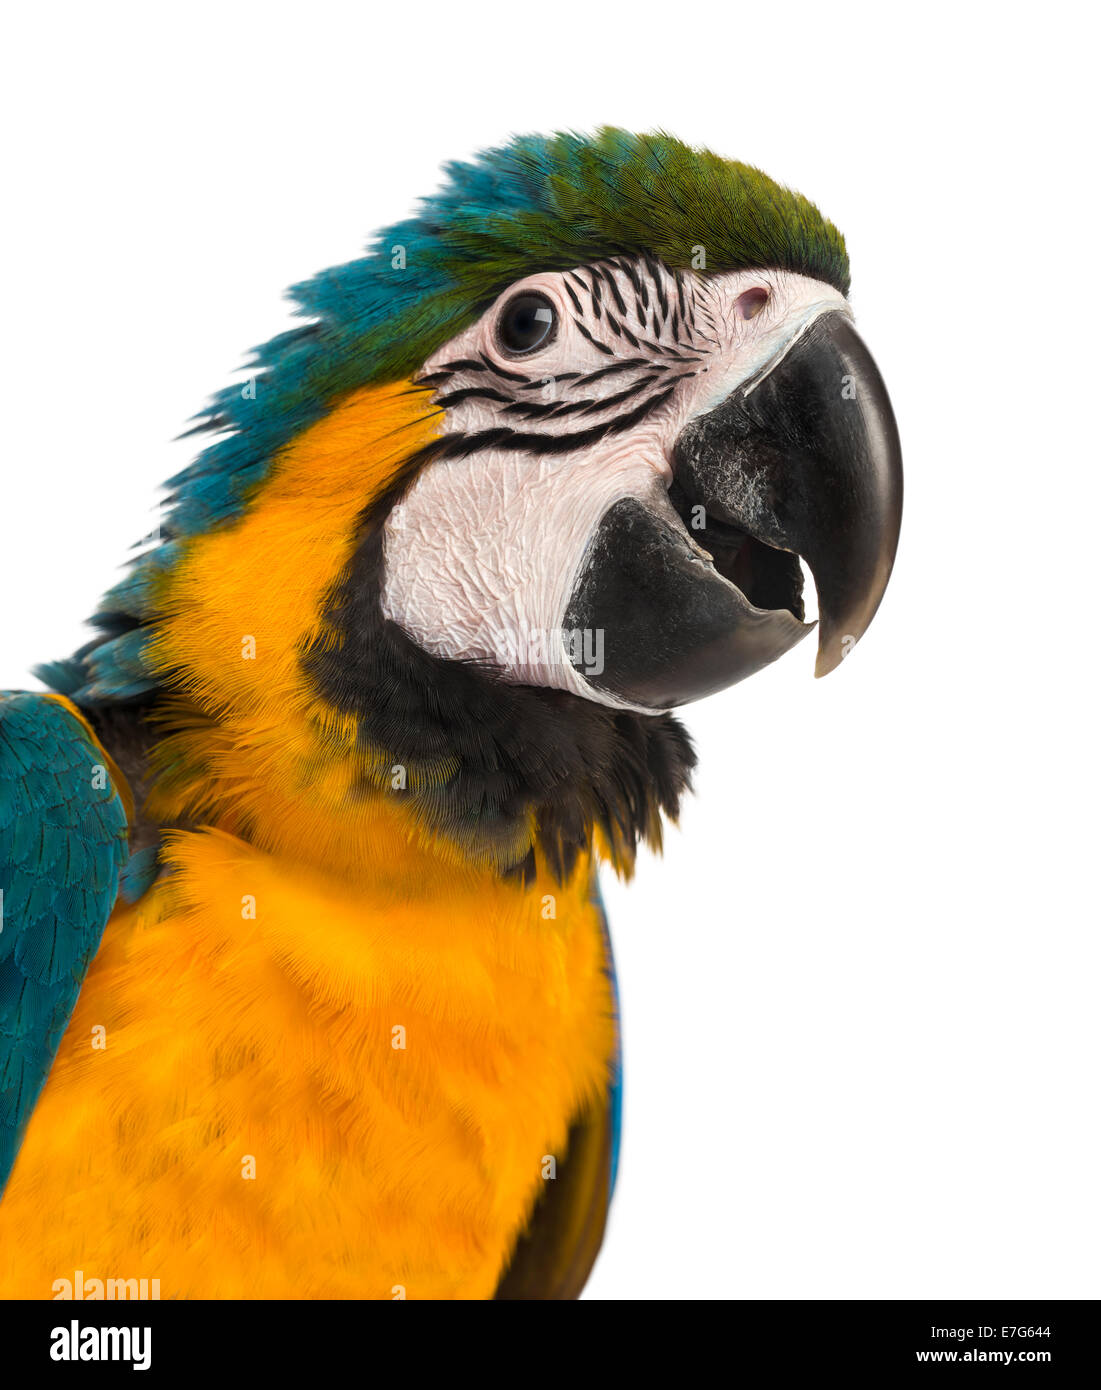 Close-up of a Blue-and-yellow Macaw (14 weeks old) in front of a white background Stock Photo